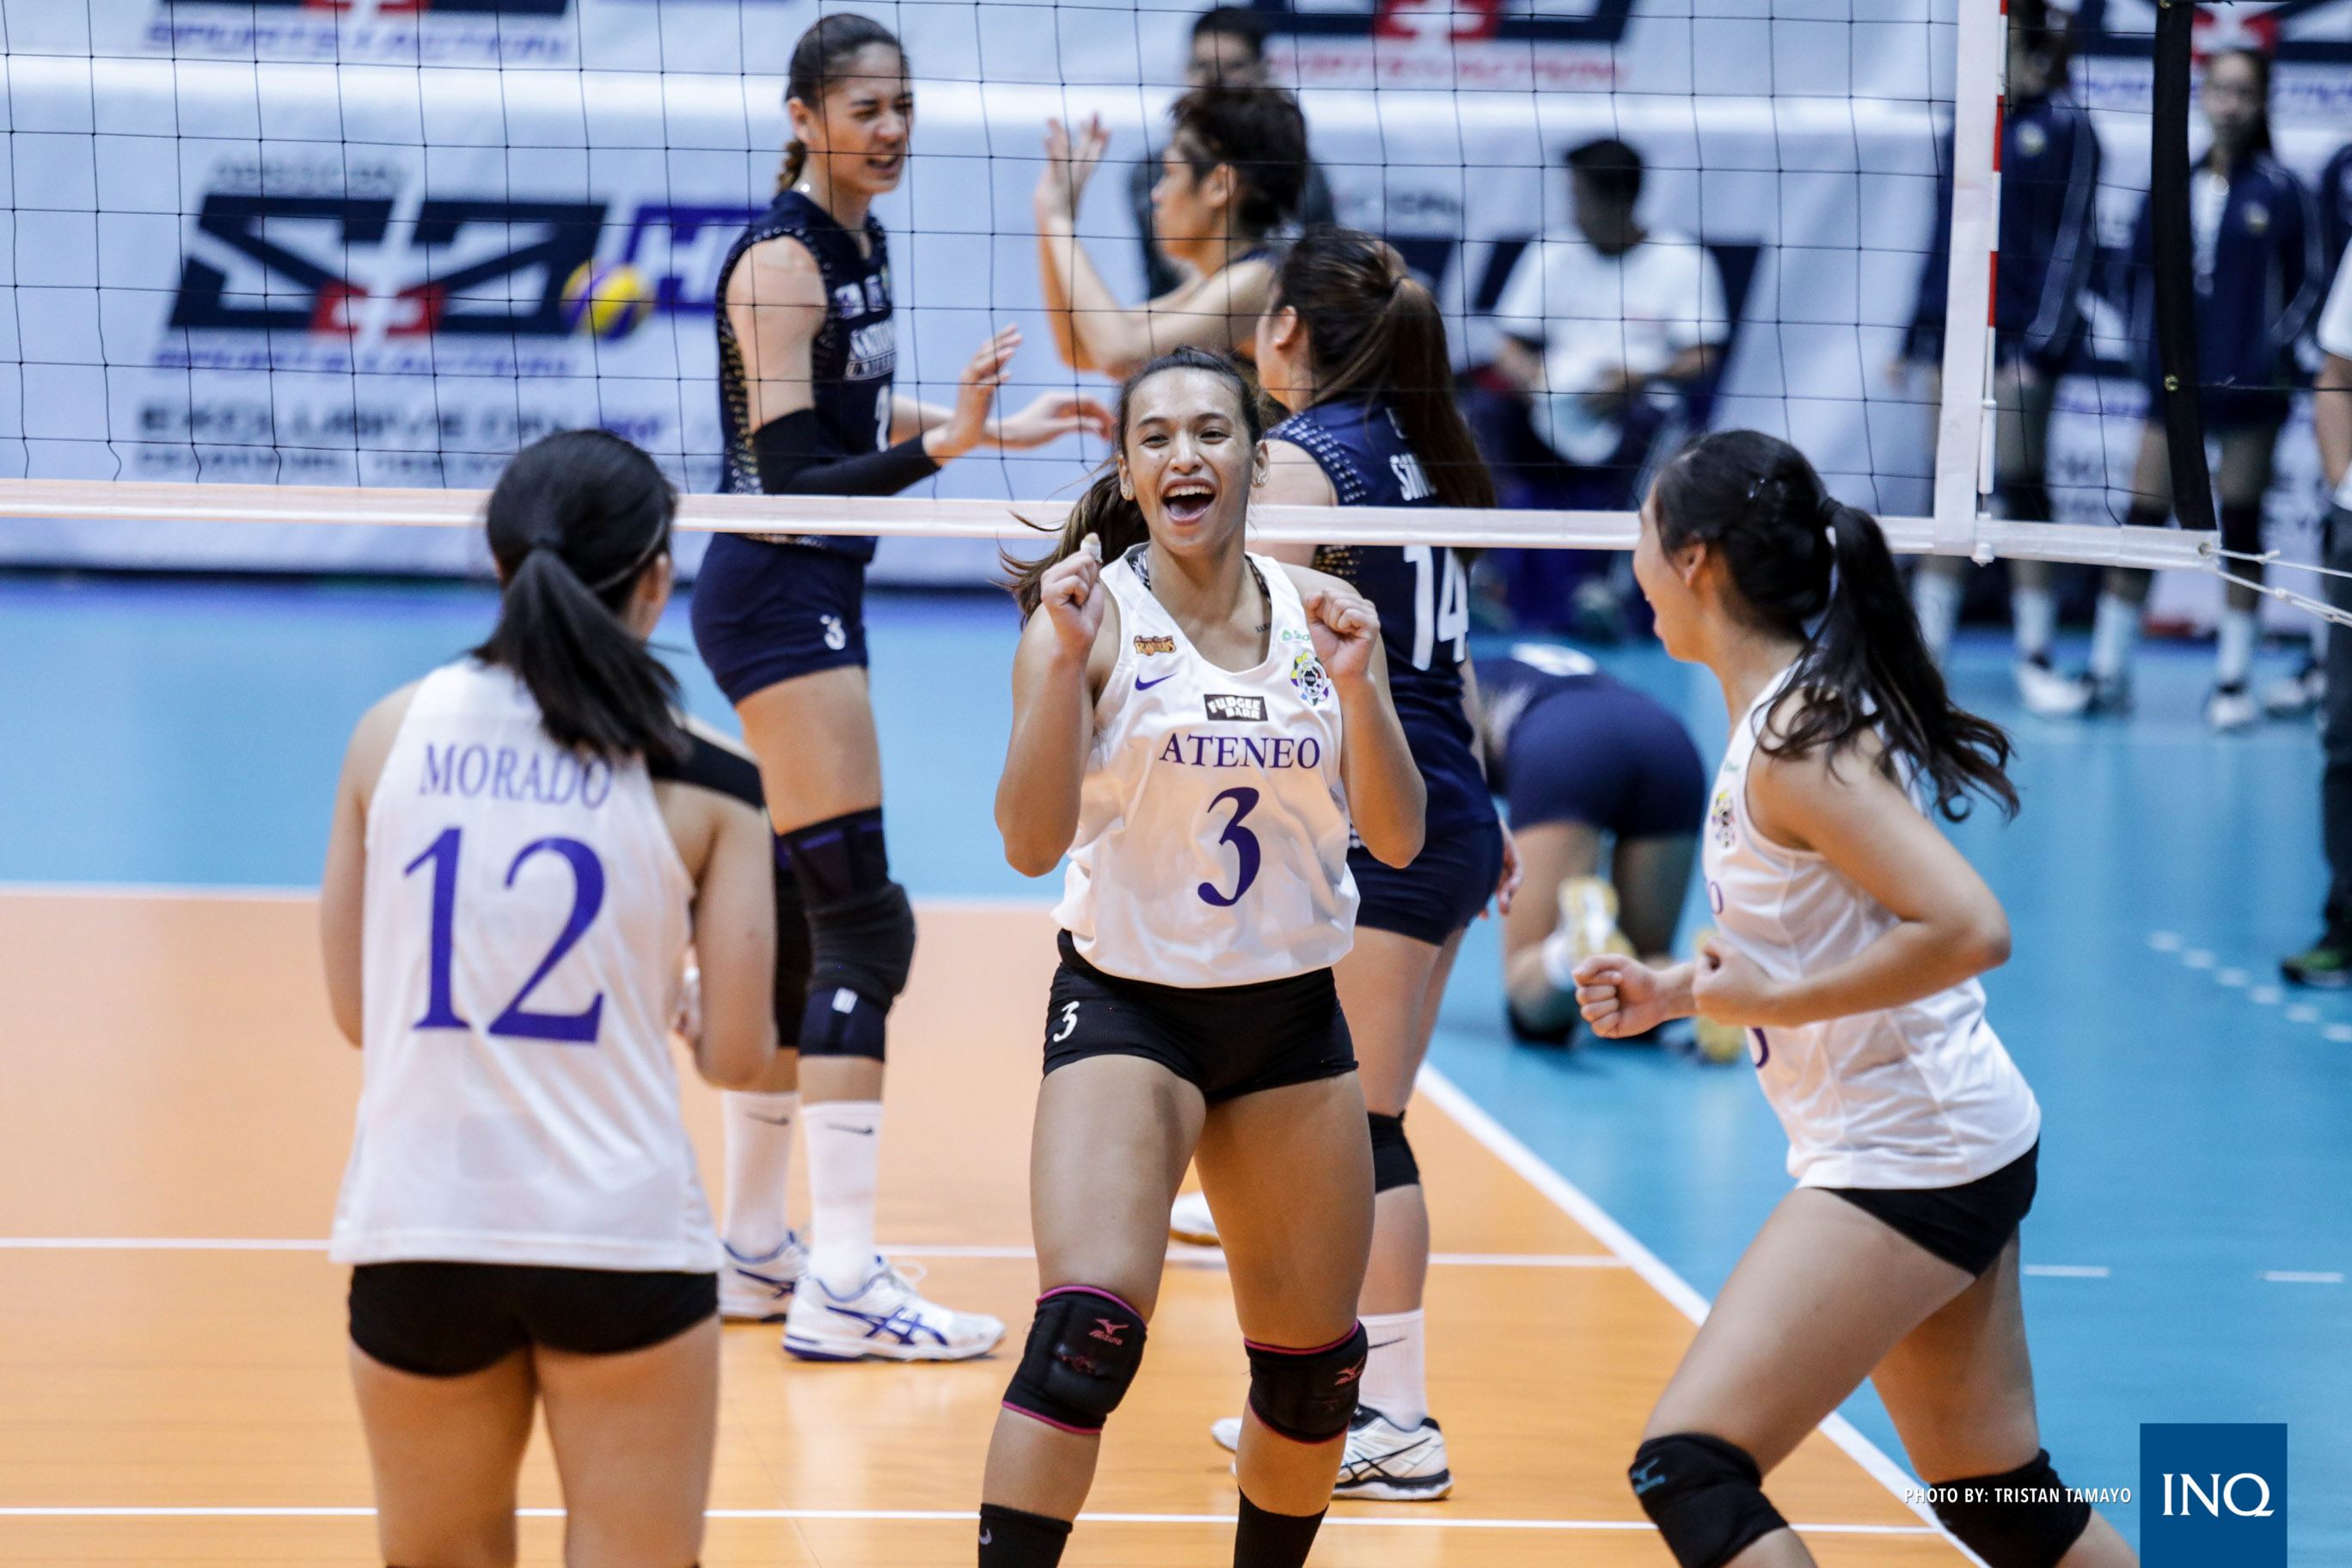 Ateneo's Mich Morente. Photo by Tristan Tamayo/INQUIRER.net